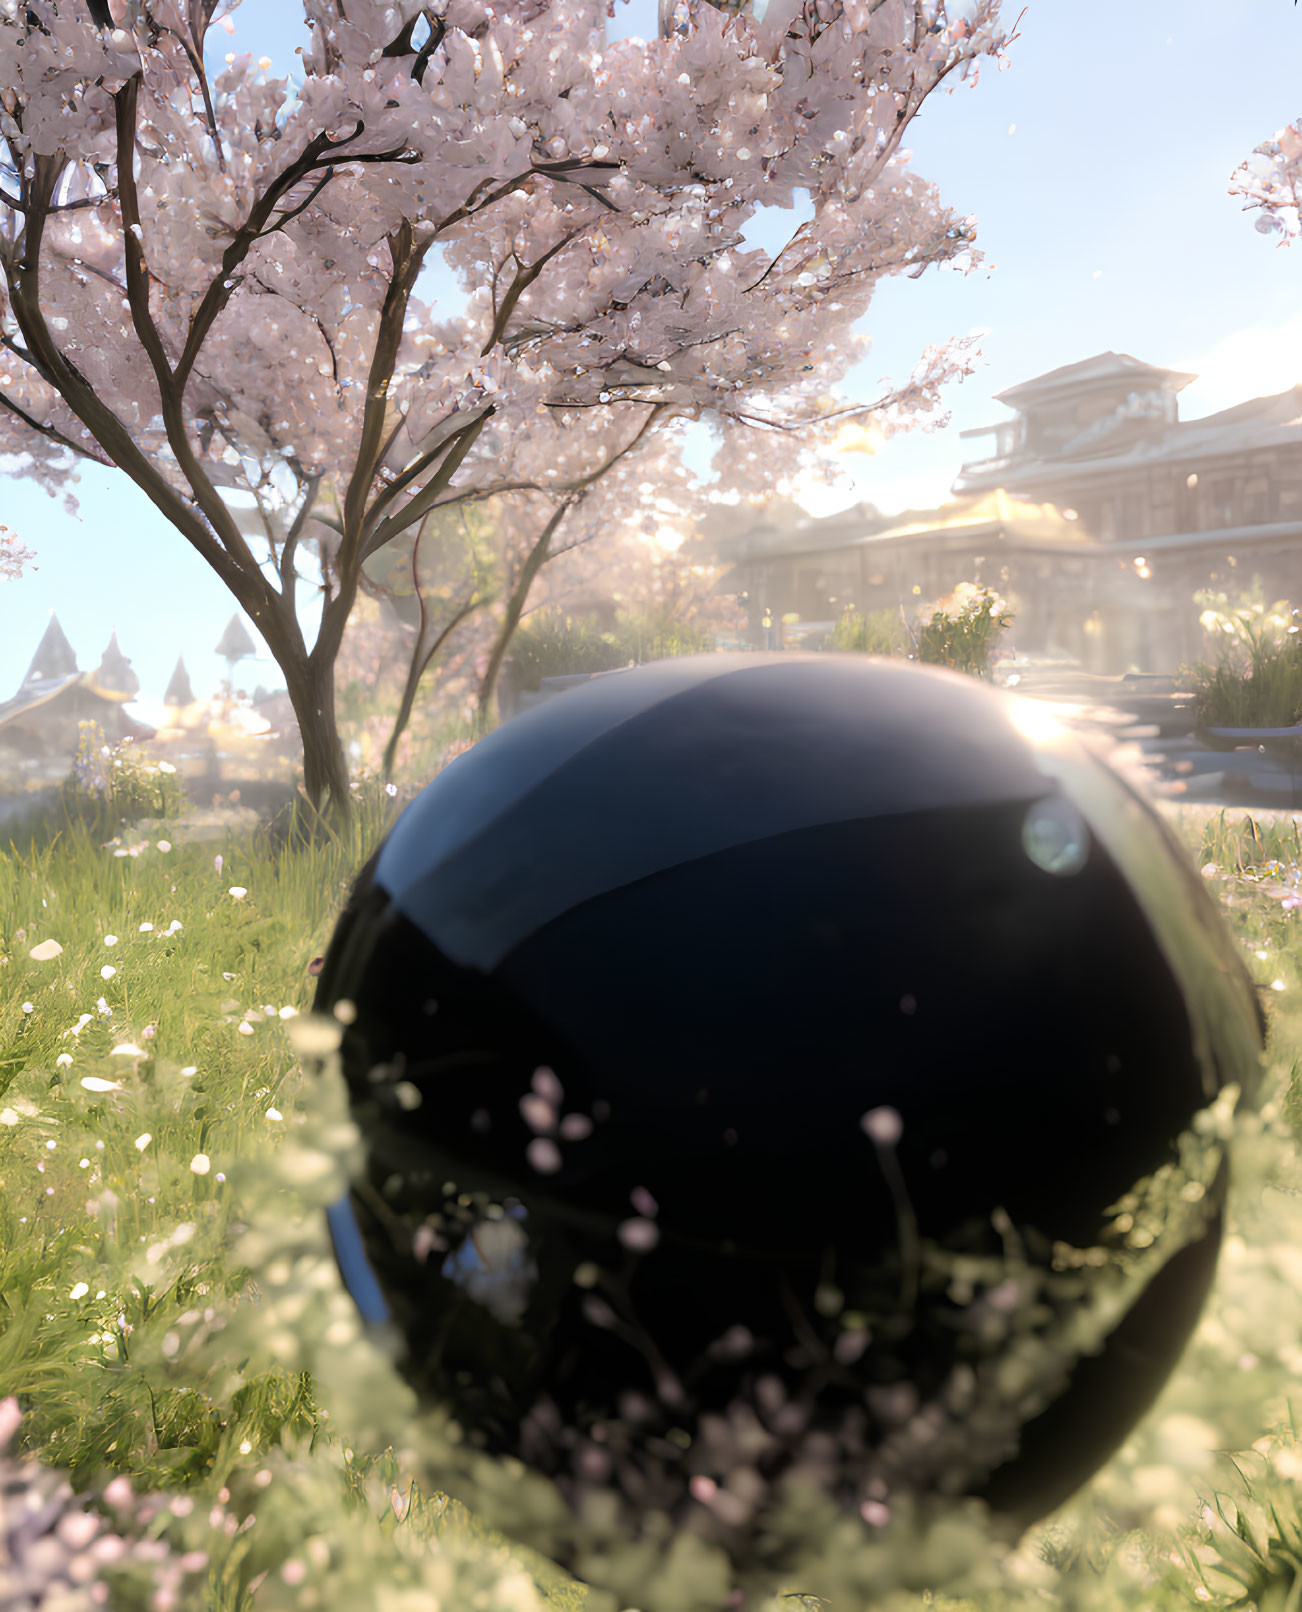 Reflective black sphere on grass with cherry blossoms and Asian building in background